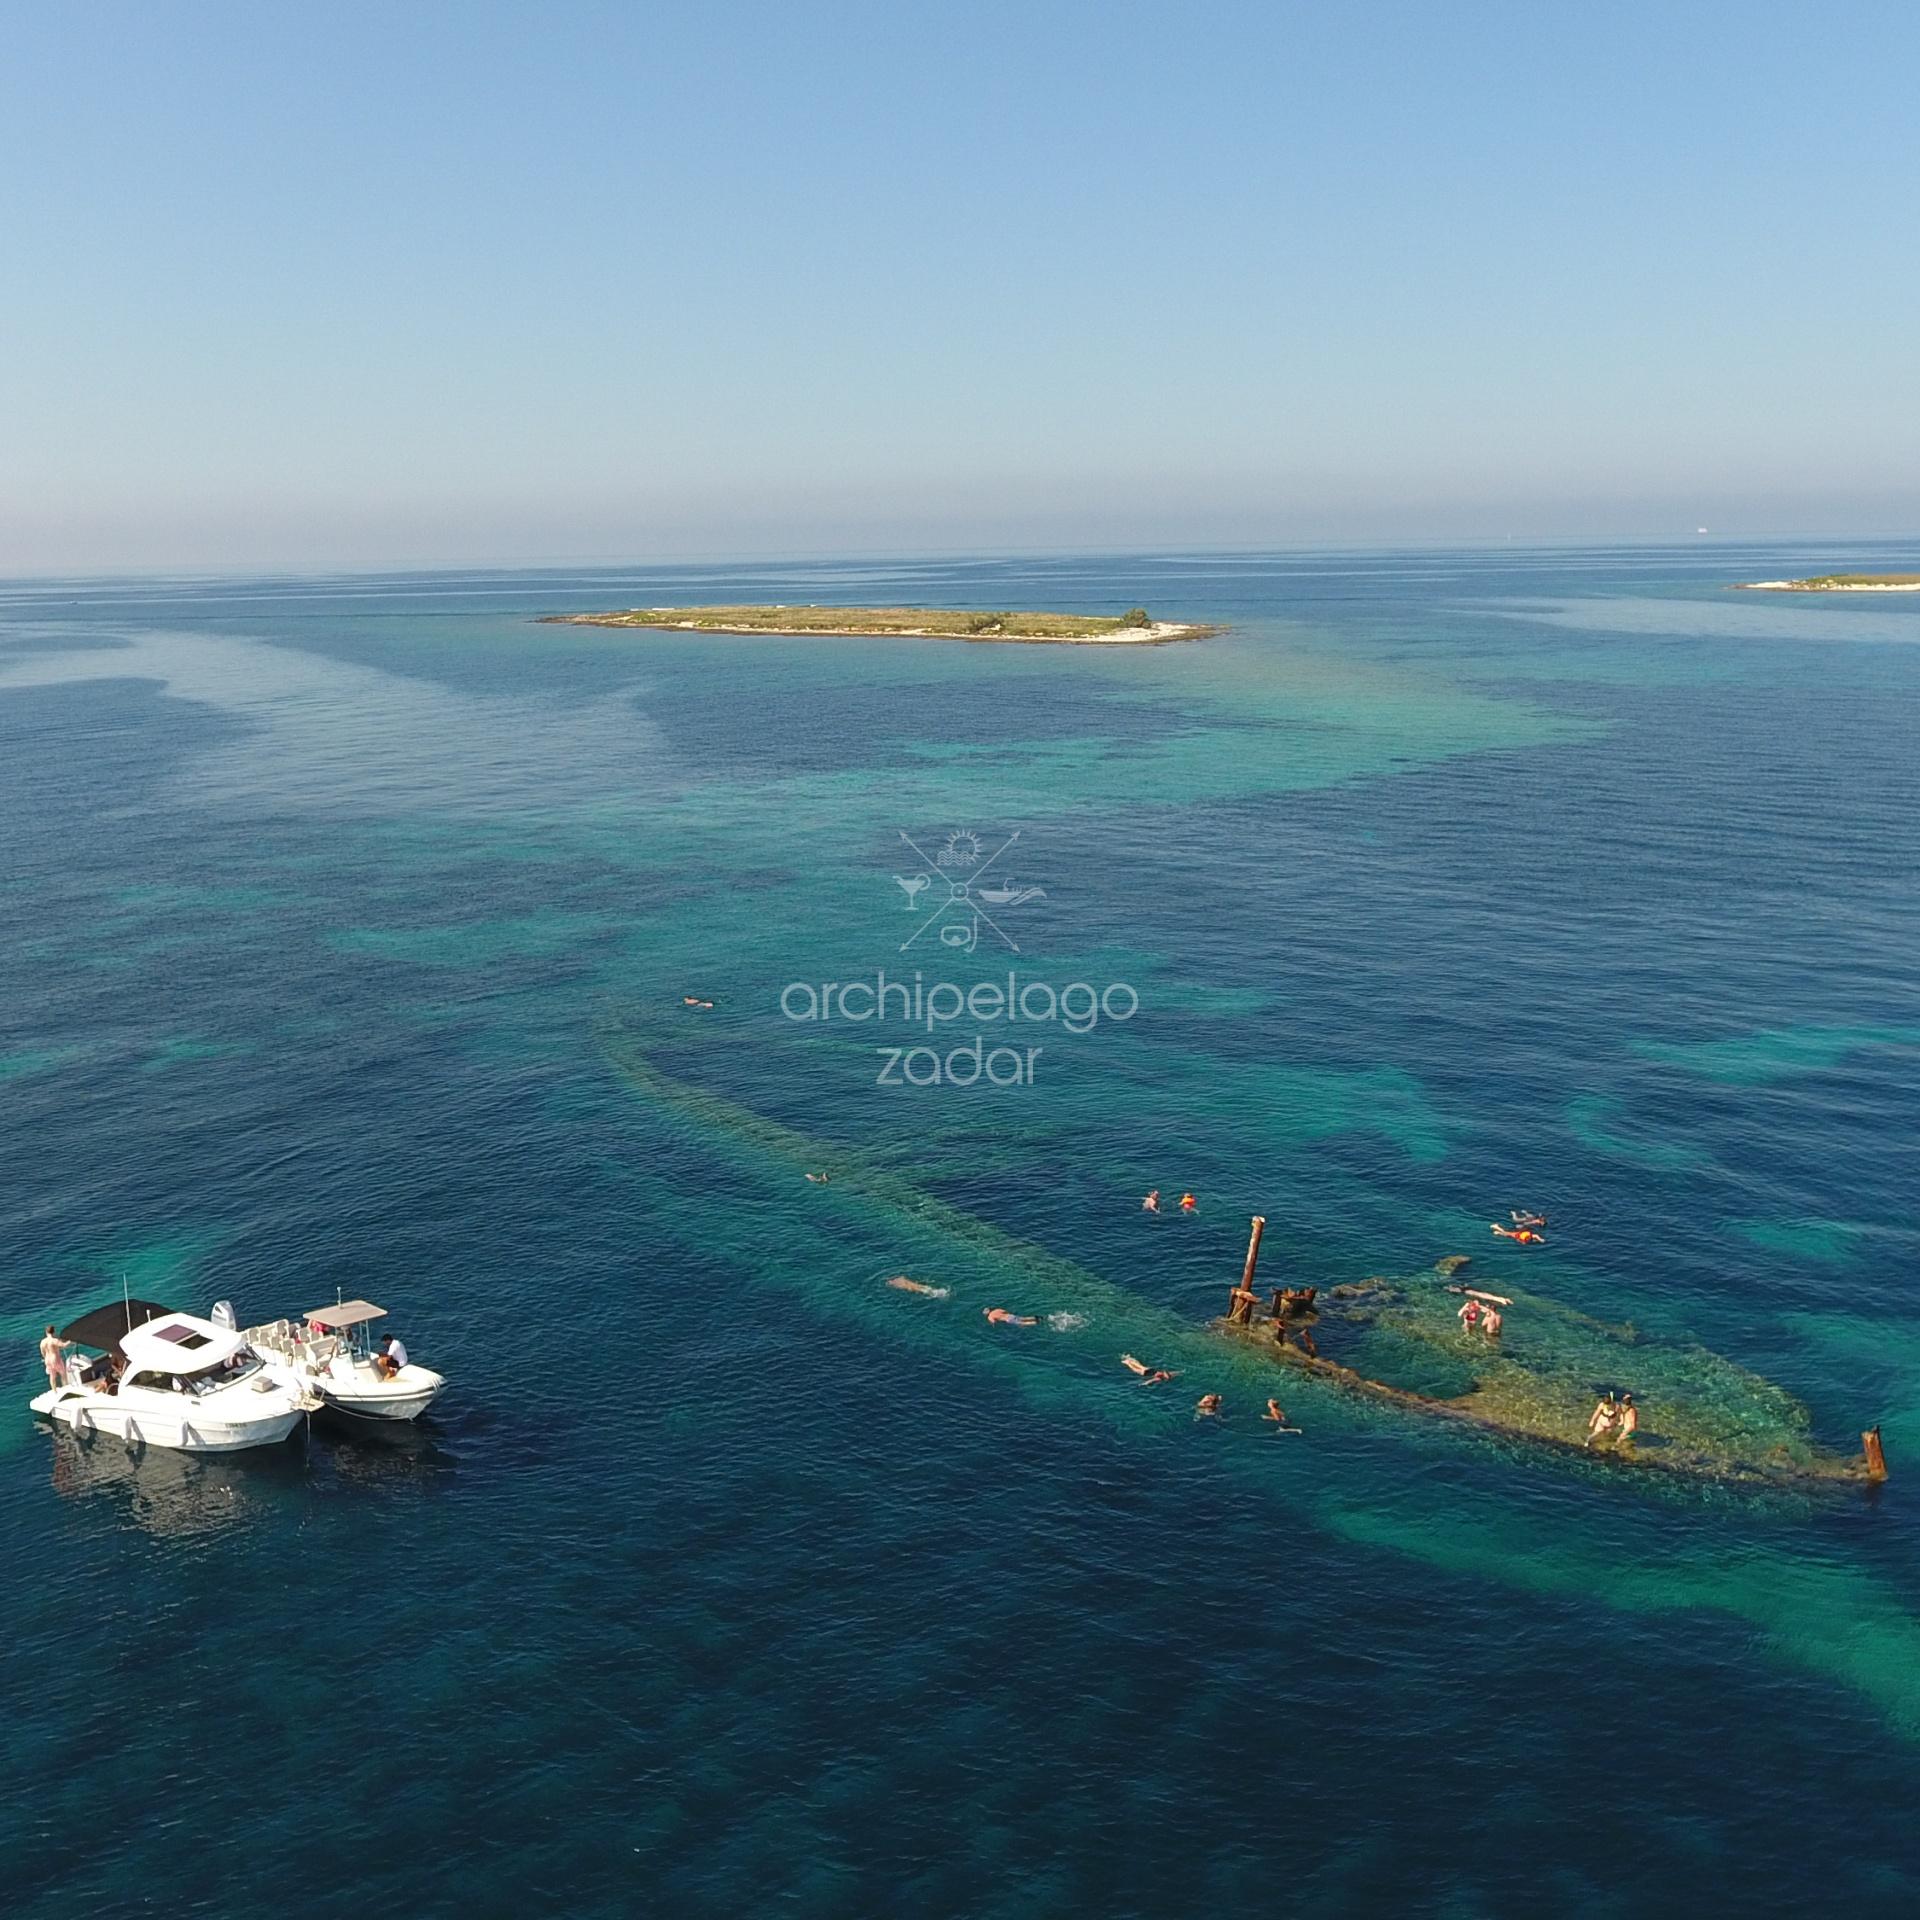 boat tours to sunken ship and people snorkeling on shipwreck